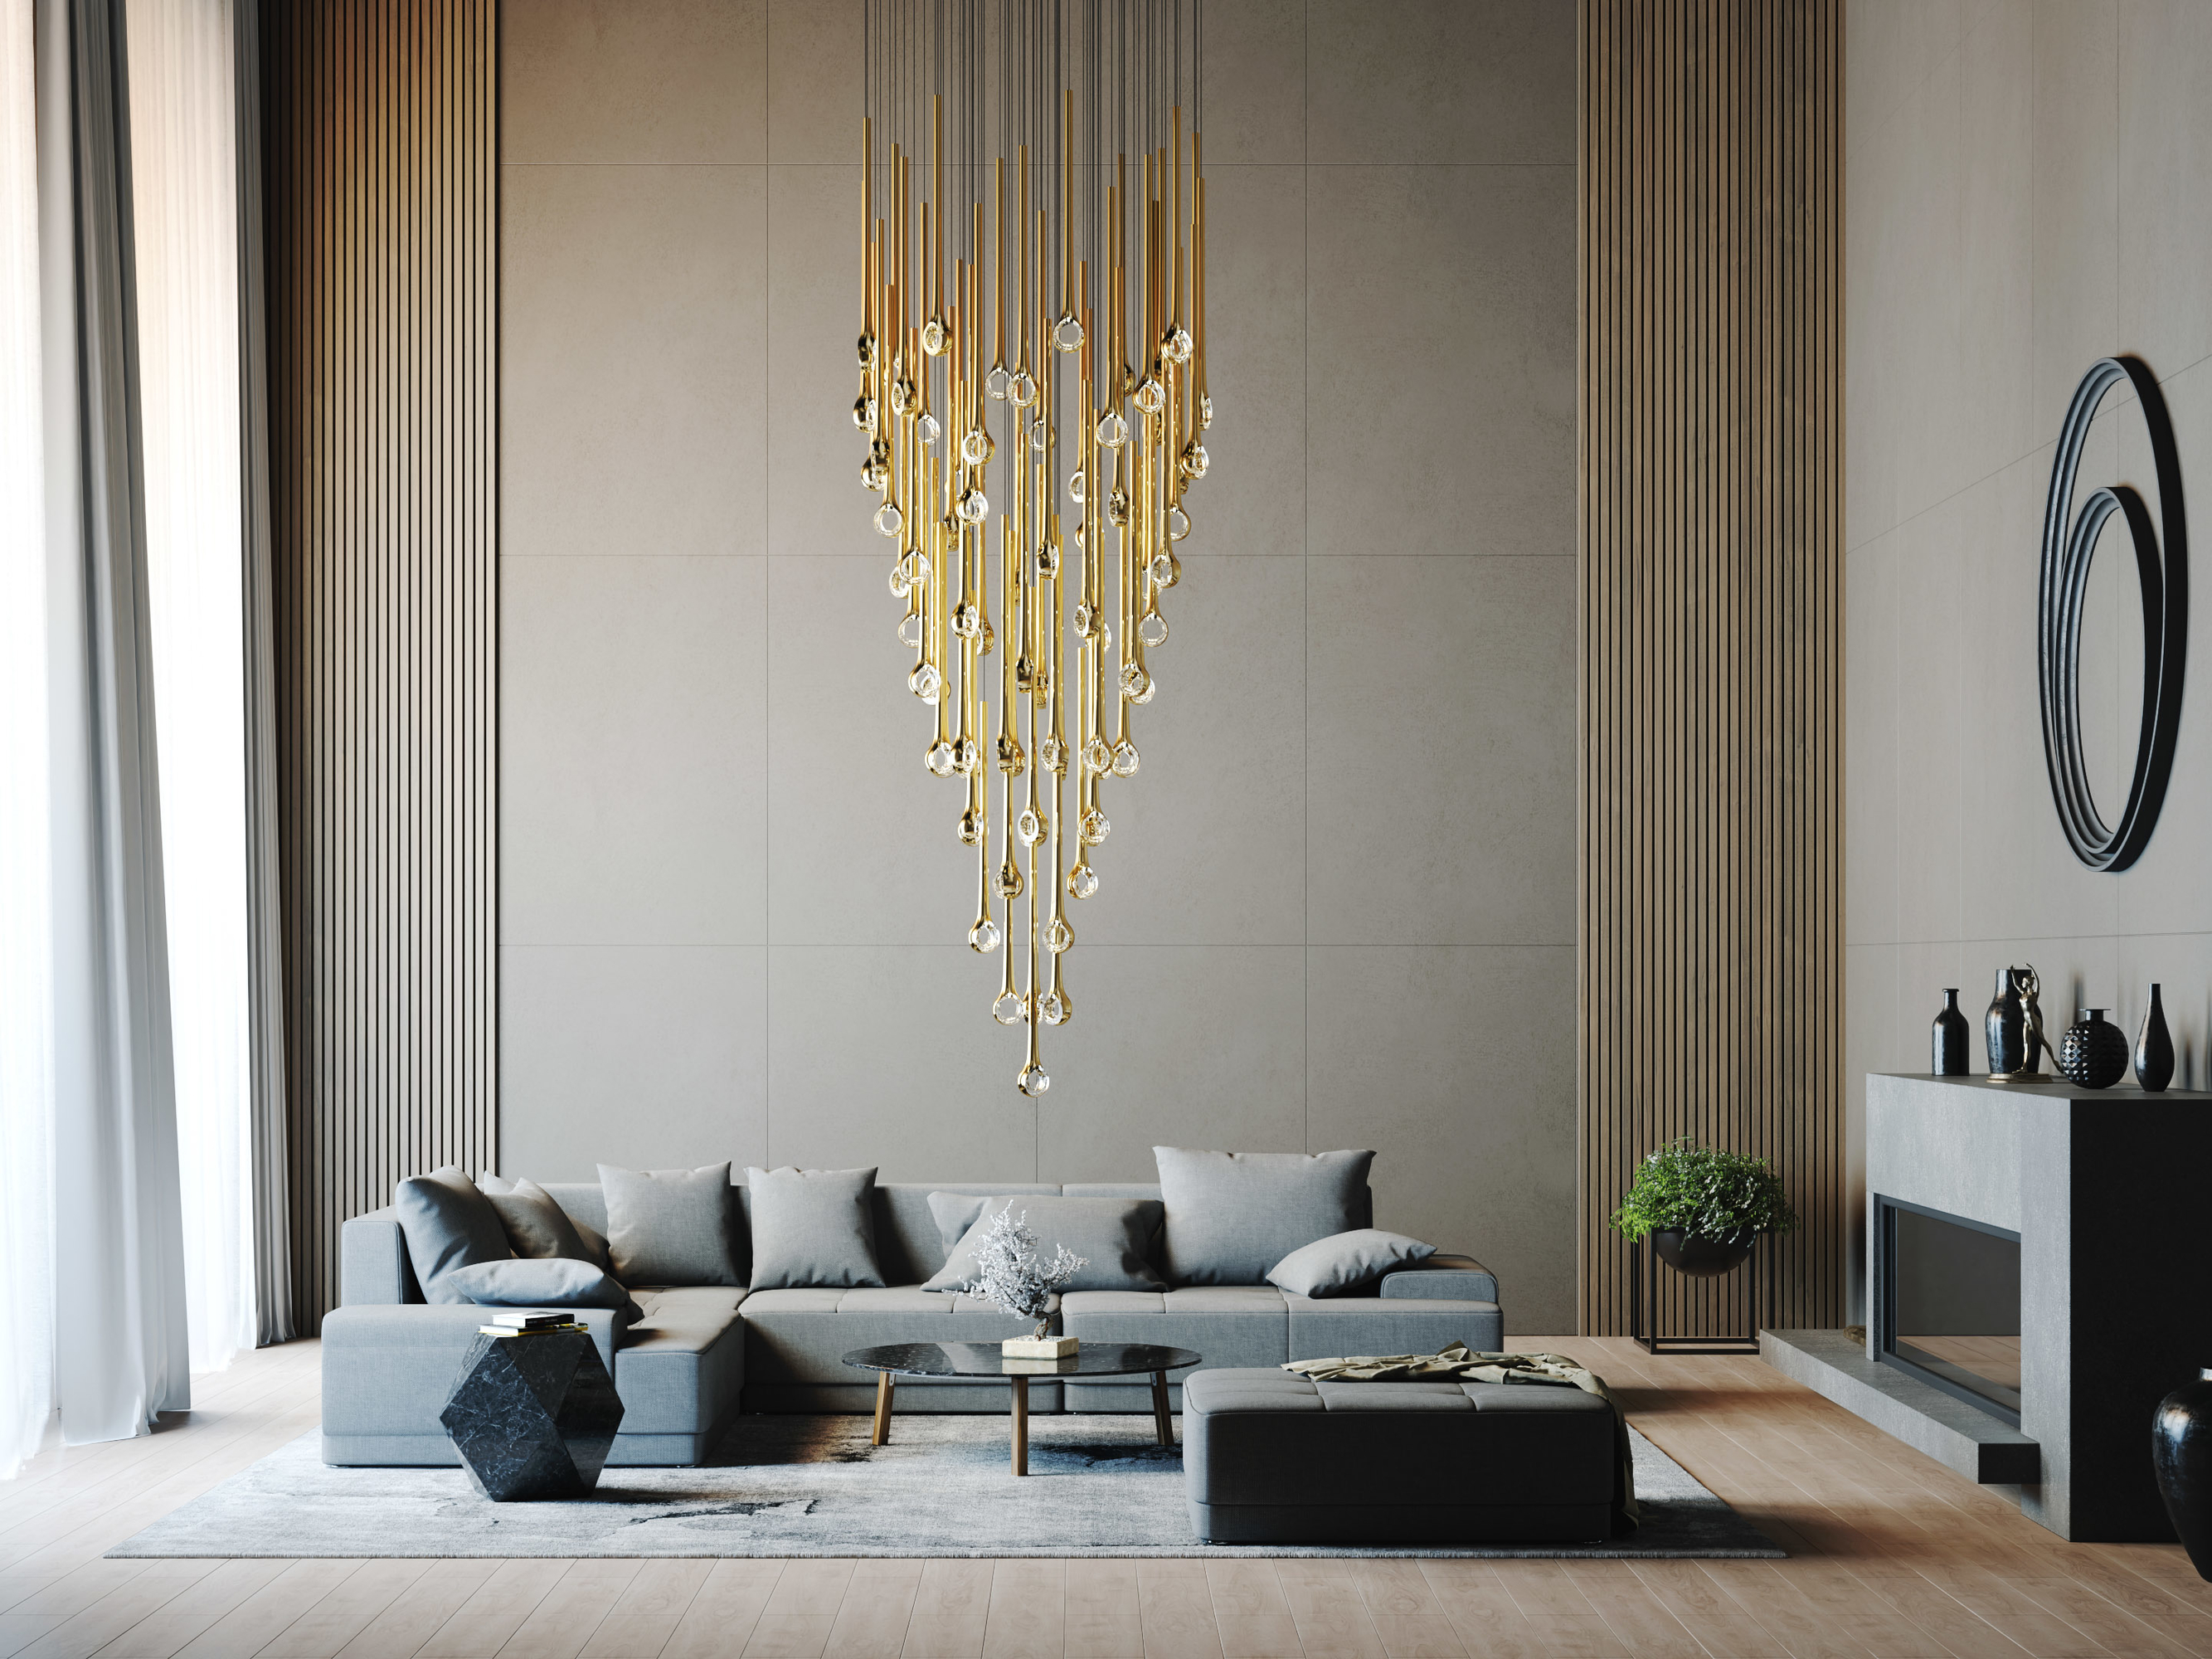 Sans Souci launches an exquisite new light – Eyelet - Architect and Interiors  India